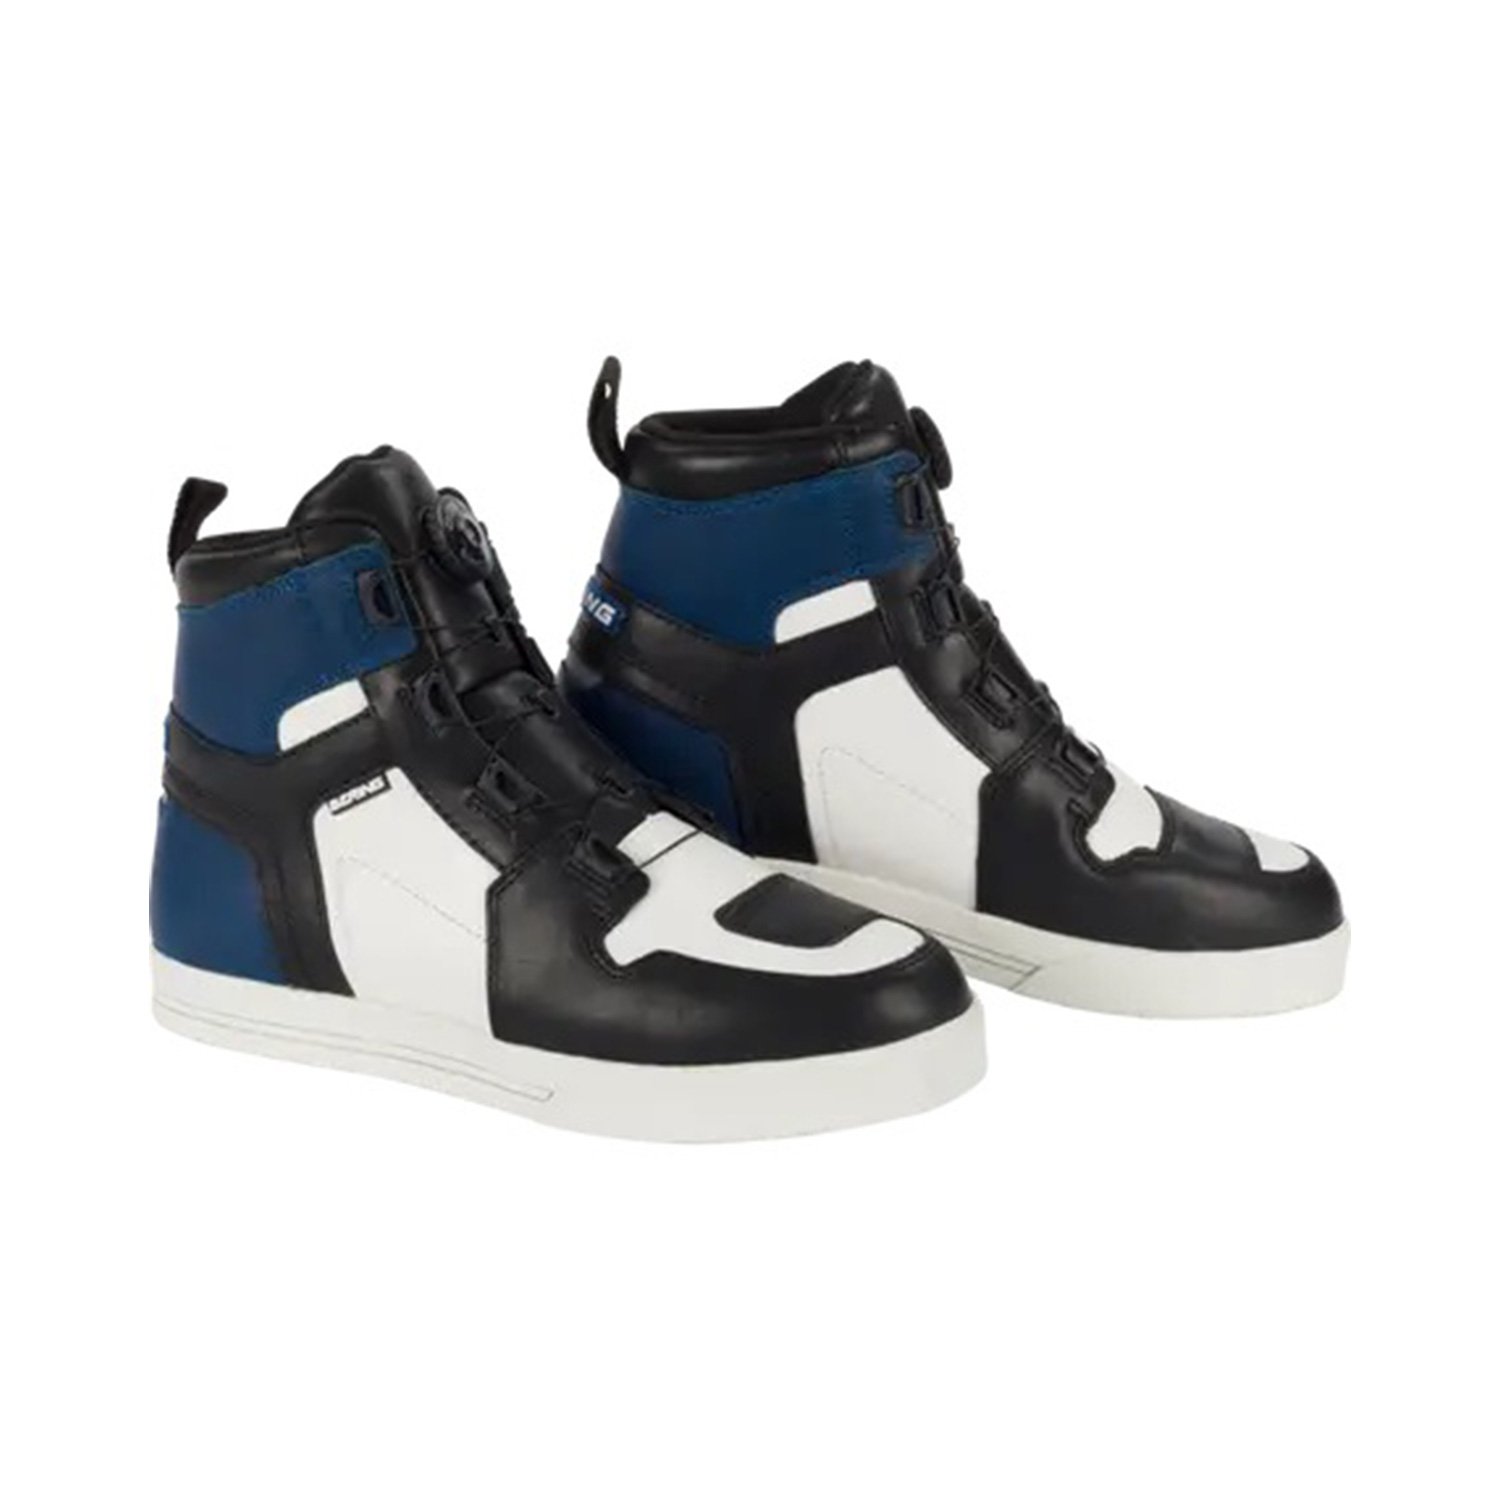 Image of Bering Sneakers Reflex A-Top Black White Blue Size 40 ID 3660815176740